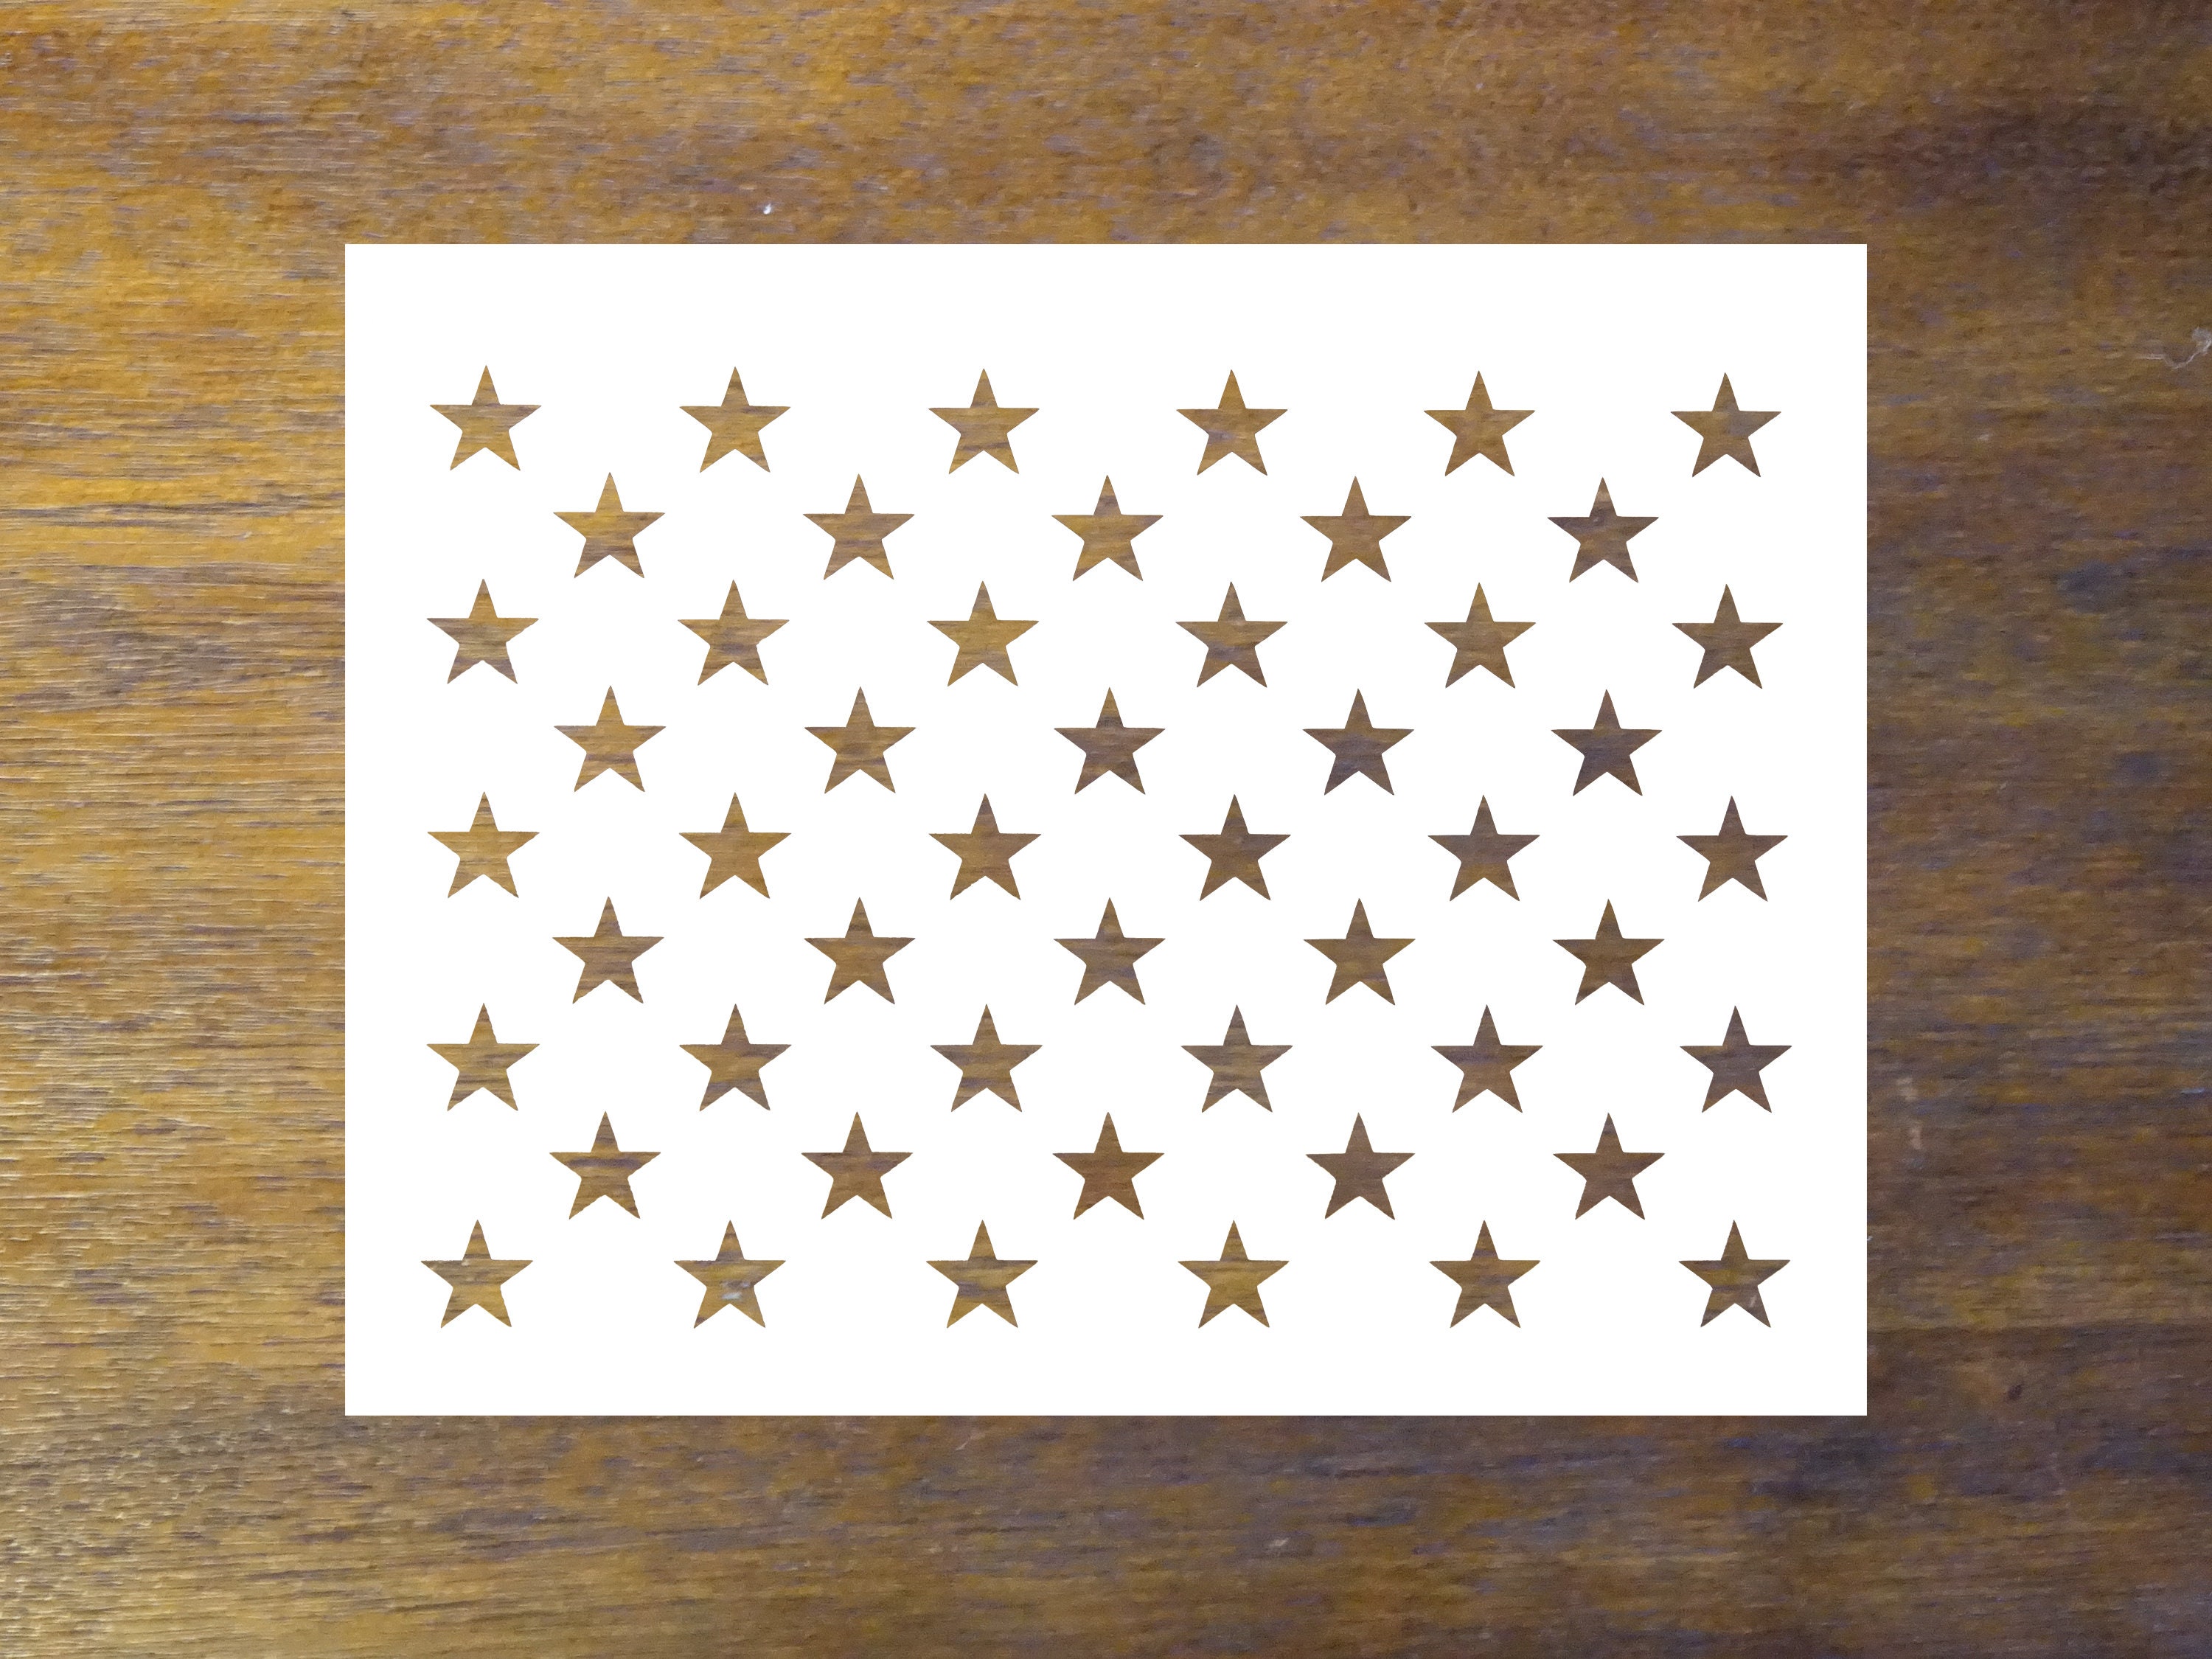 50 Stars Stencil Reusable Color Draw And Paint Stencil Etsy